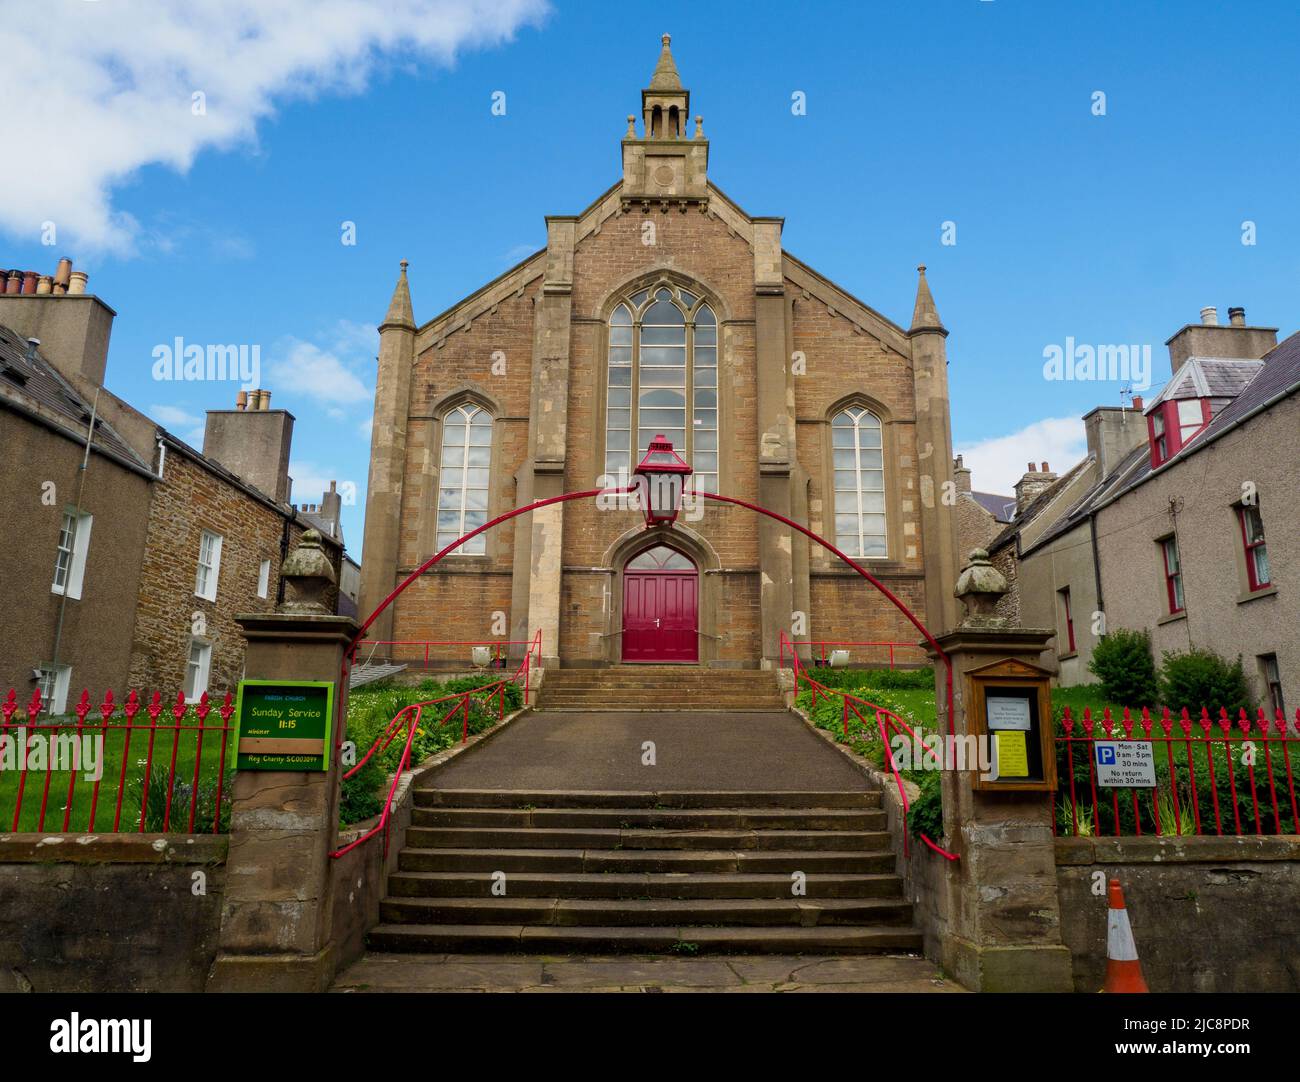 Stromness Parish Church, denomination Church of Scotland, is situated in the town of Stromness on the Orkney Islands, Scotland. Stock Photo